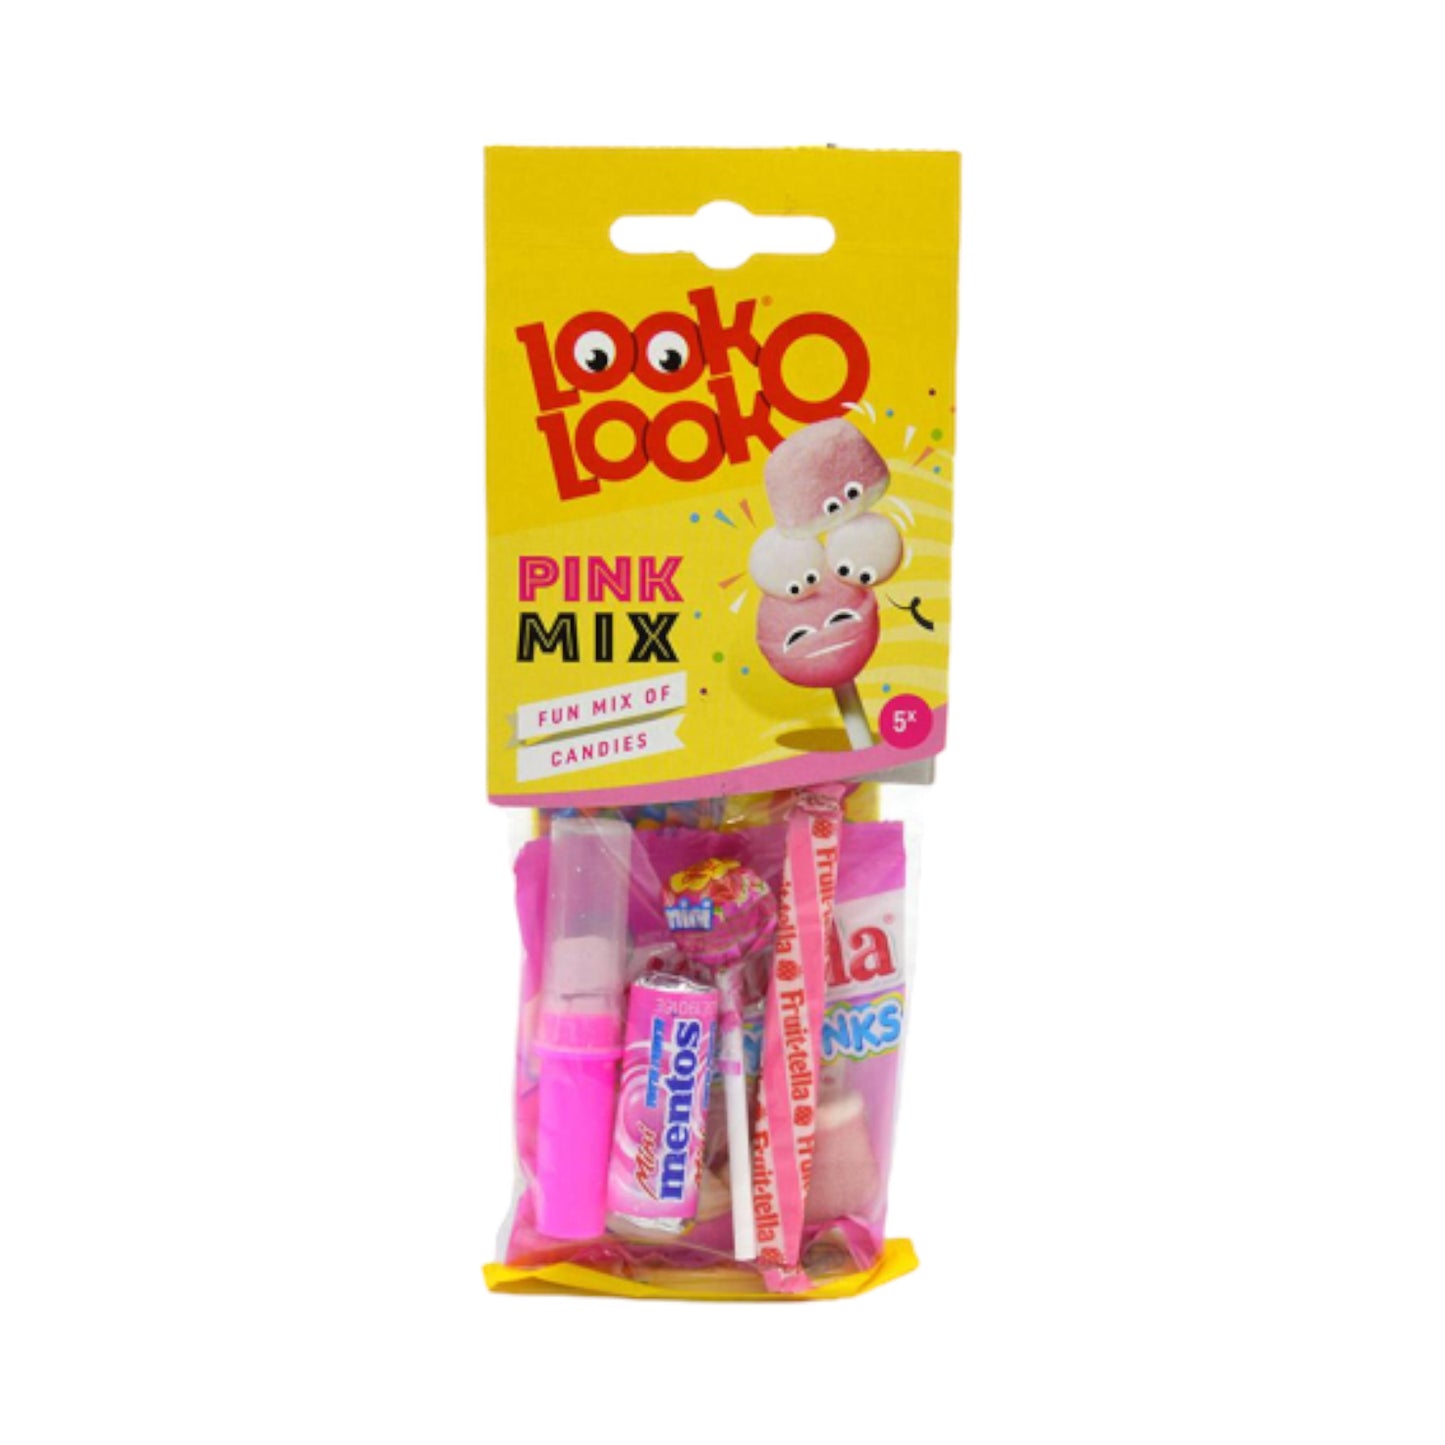 Look-O-Look Candy Pink Mix - 45g